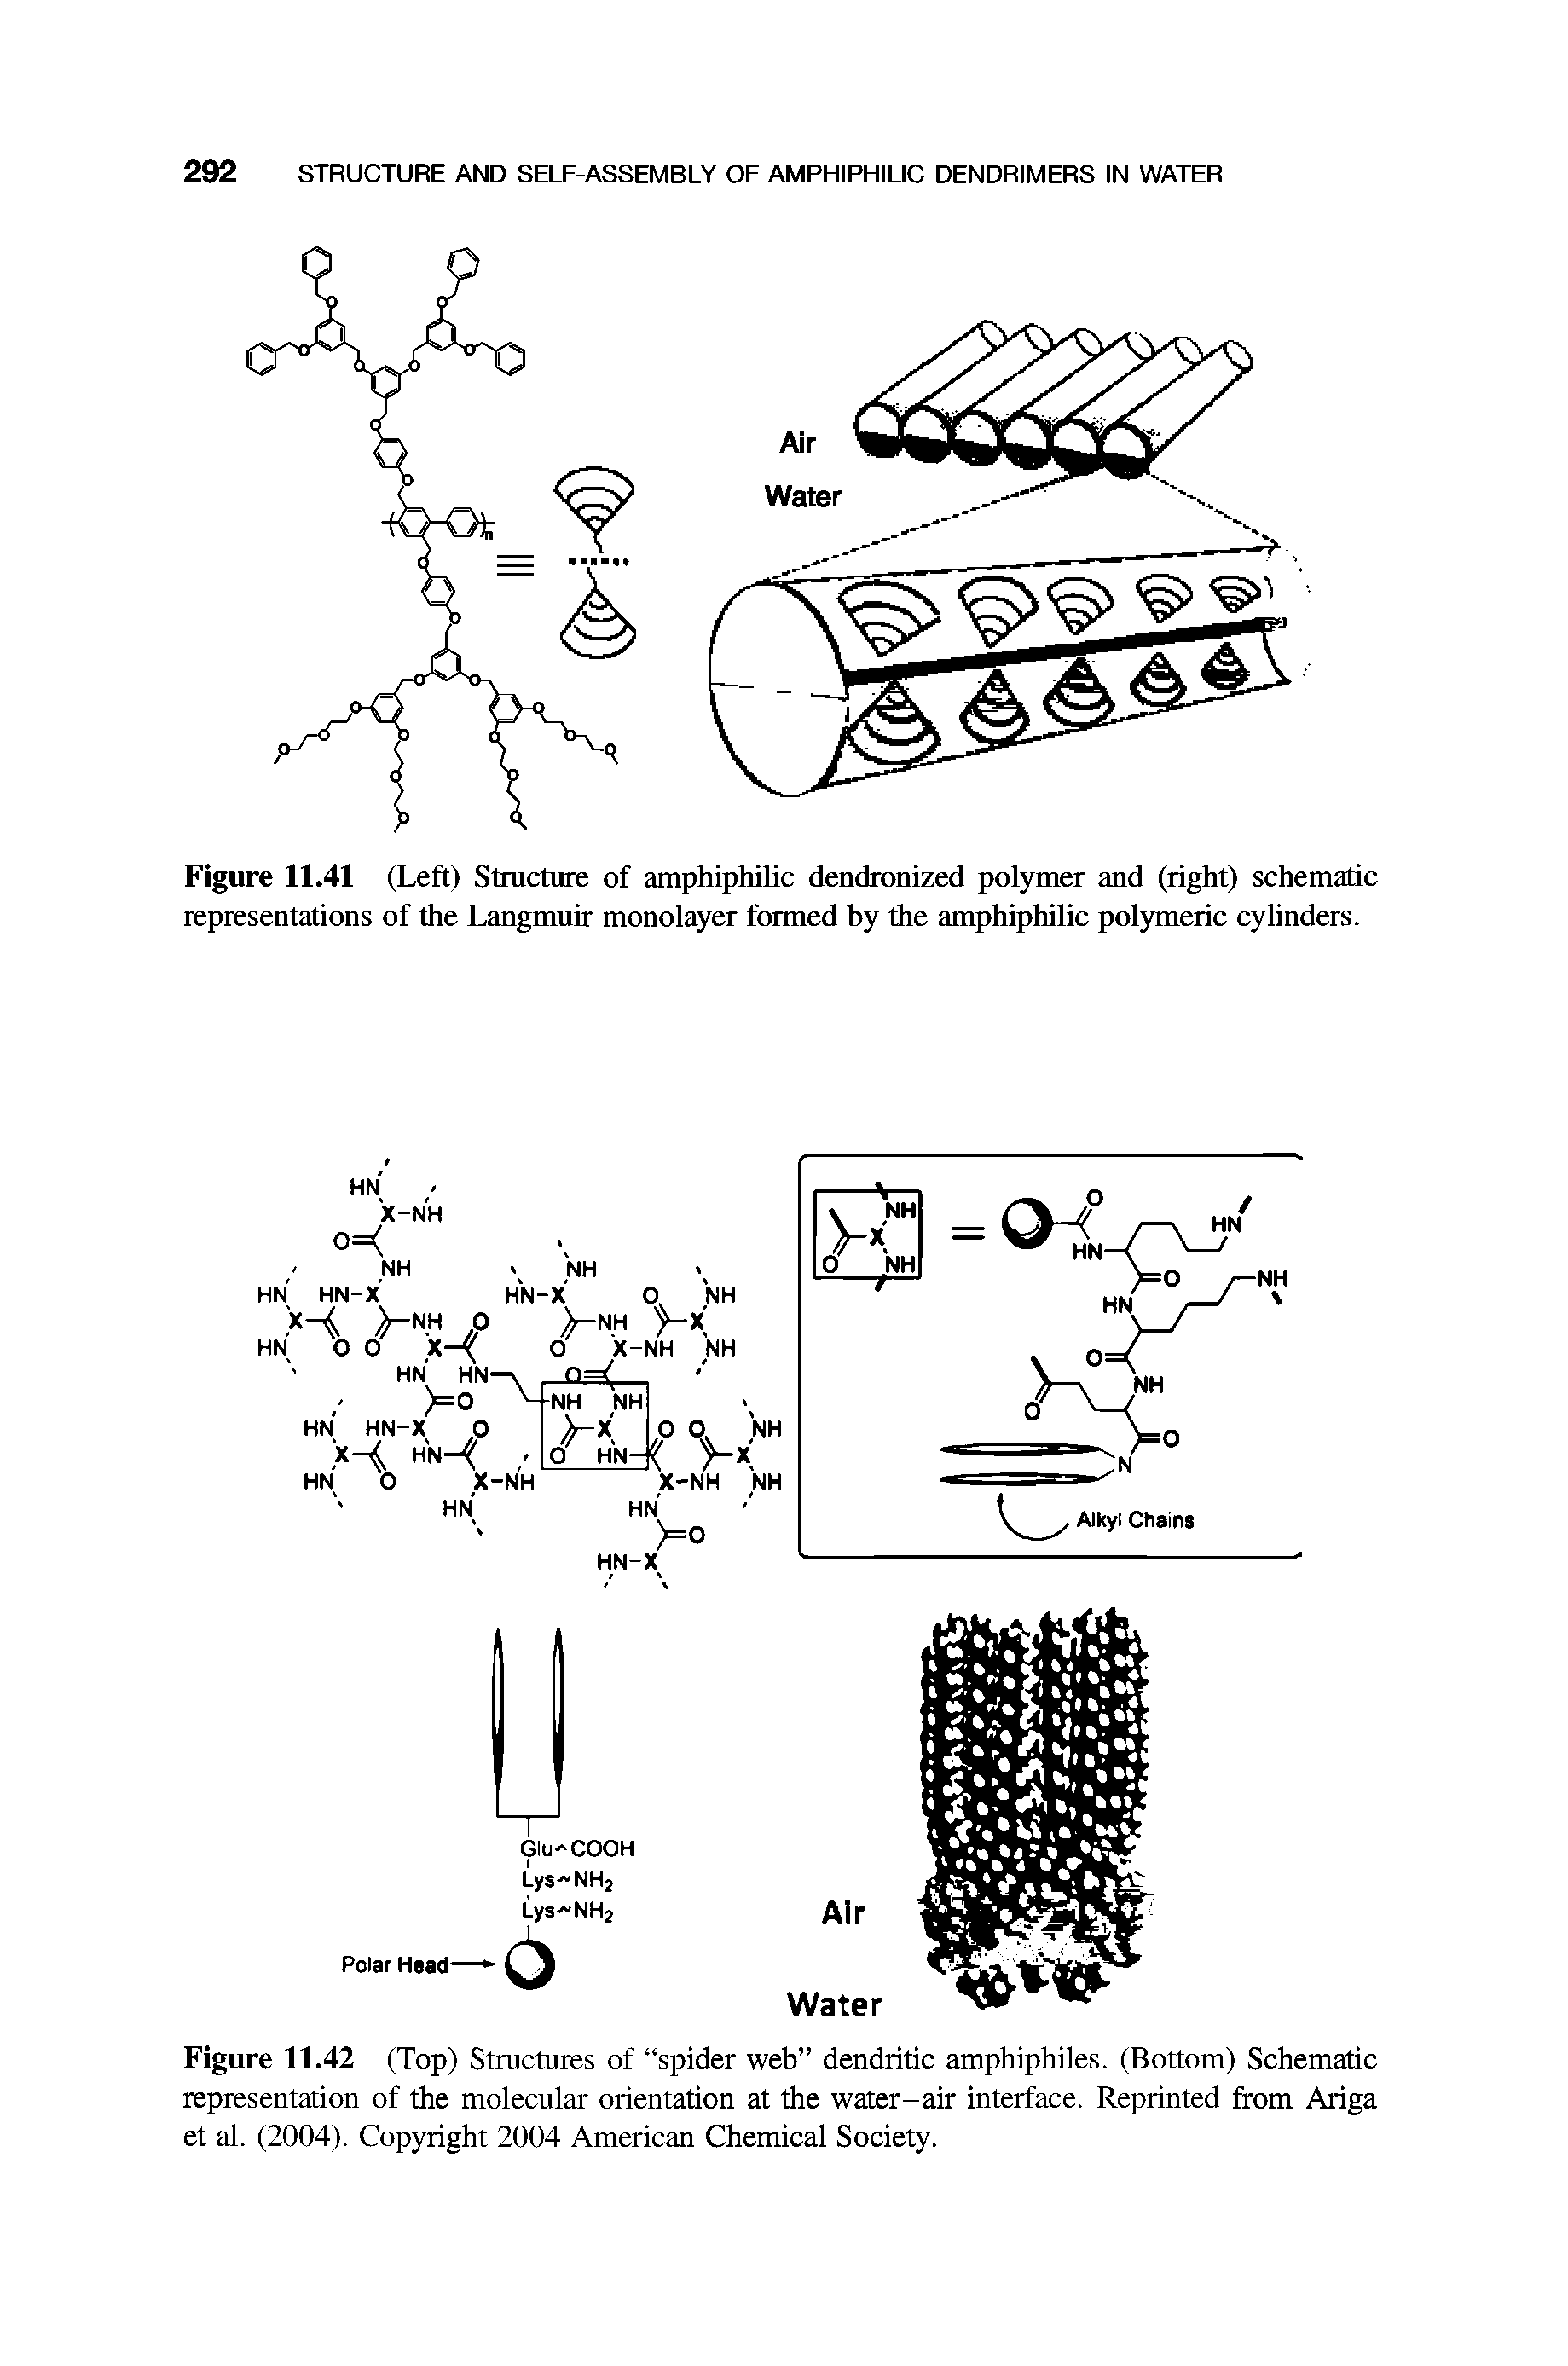 Figure 11.41 (Left) Structure of amphiphilic dendronized polymer and (right) schematic representations of the Langmuir monolayer formed by the amphiphilic pol)nneric cylinders.